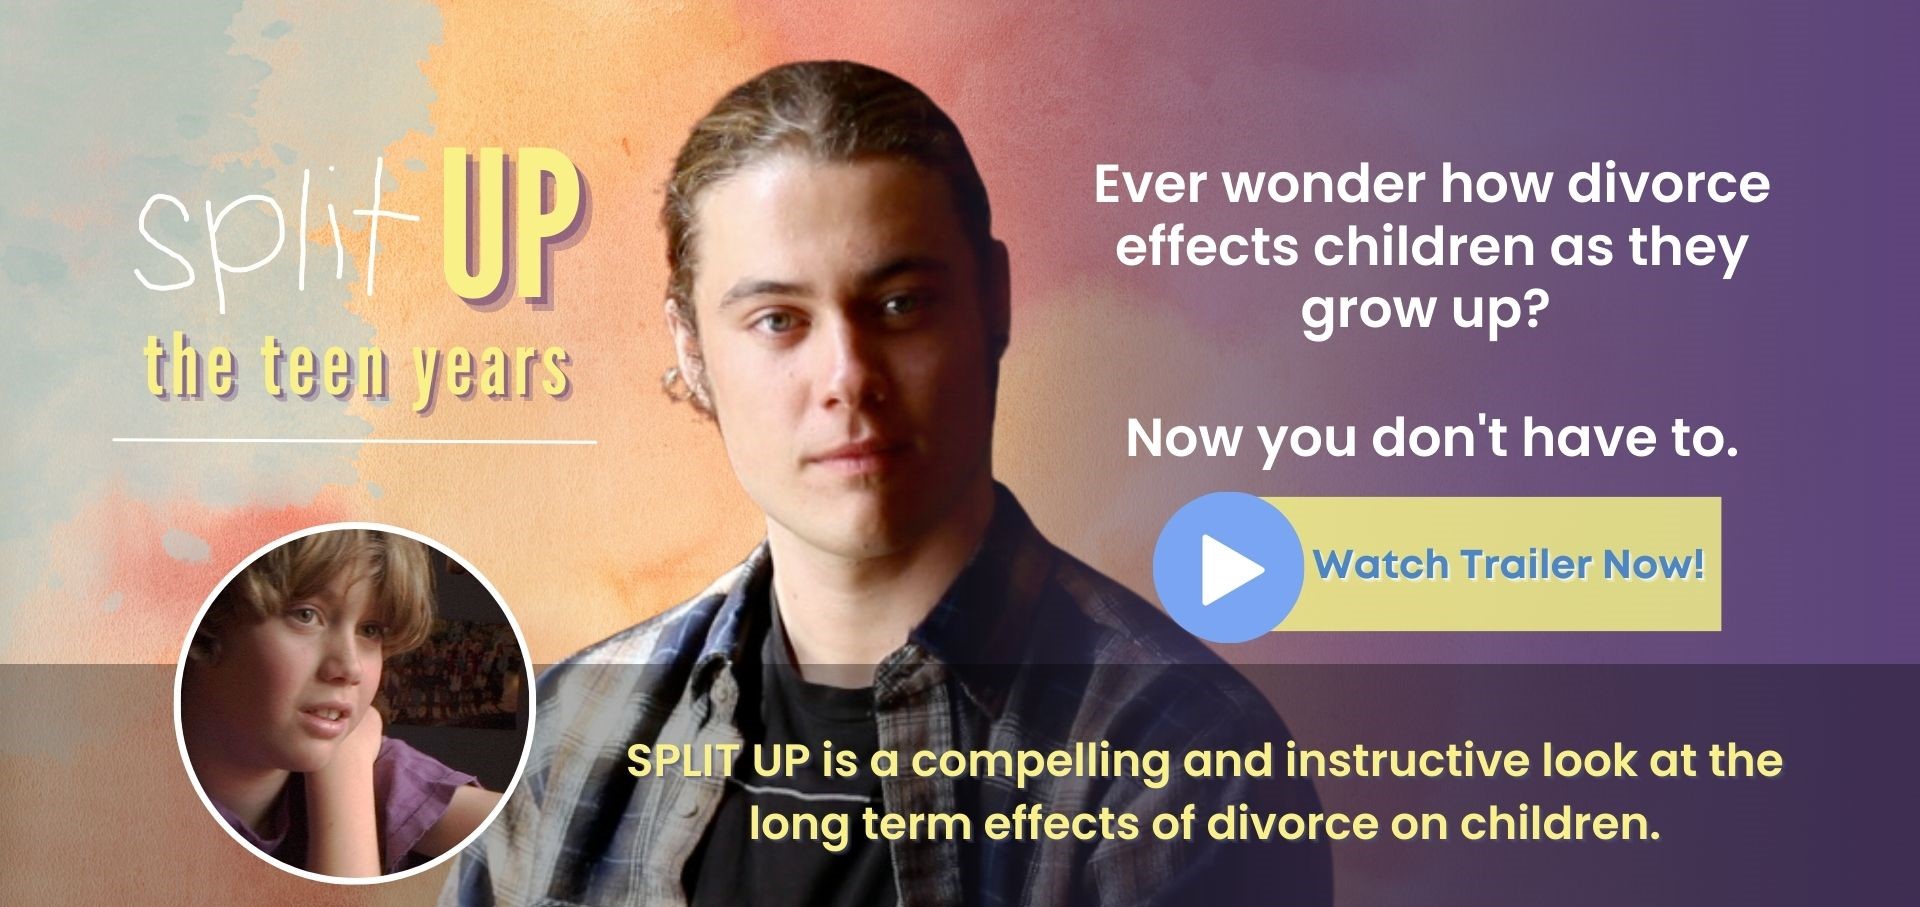 SPLIT UP is a compelling and instructive look at the long term effects of divorce on children.